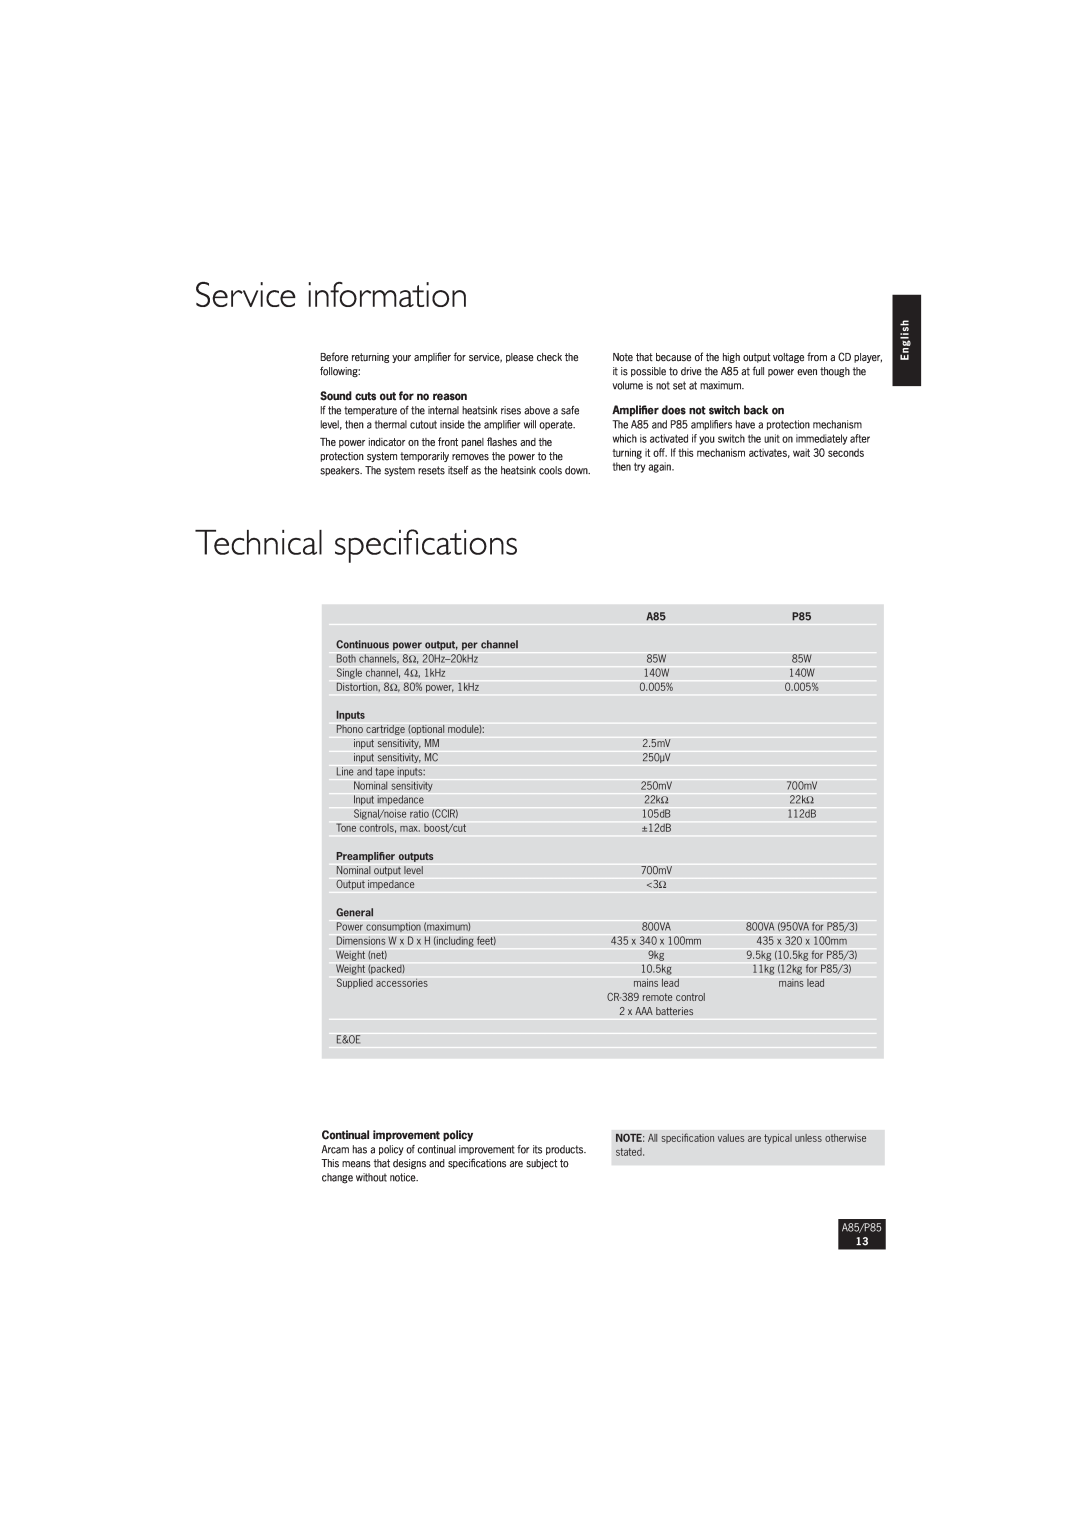 Arcam P85/3 Service information, Technical speciﬁcations, Sound cuts out for no reason, Ampliﬁer does not switch back on 